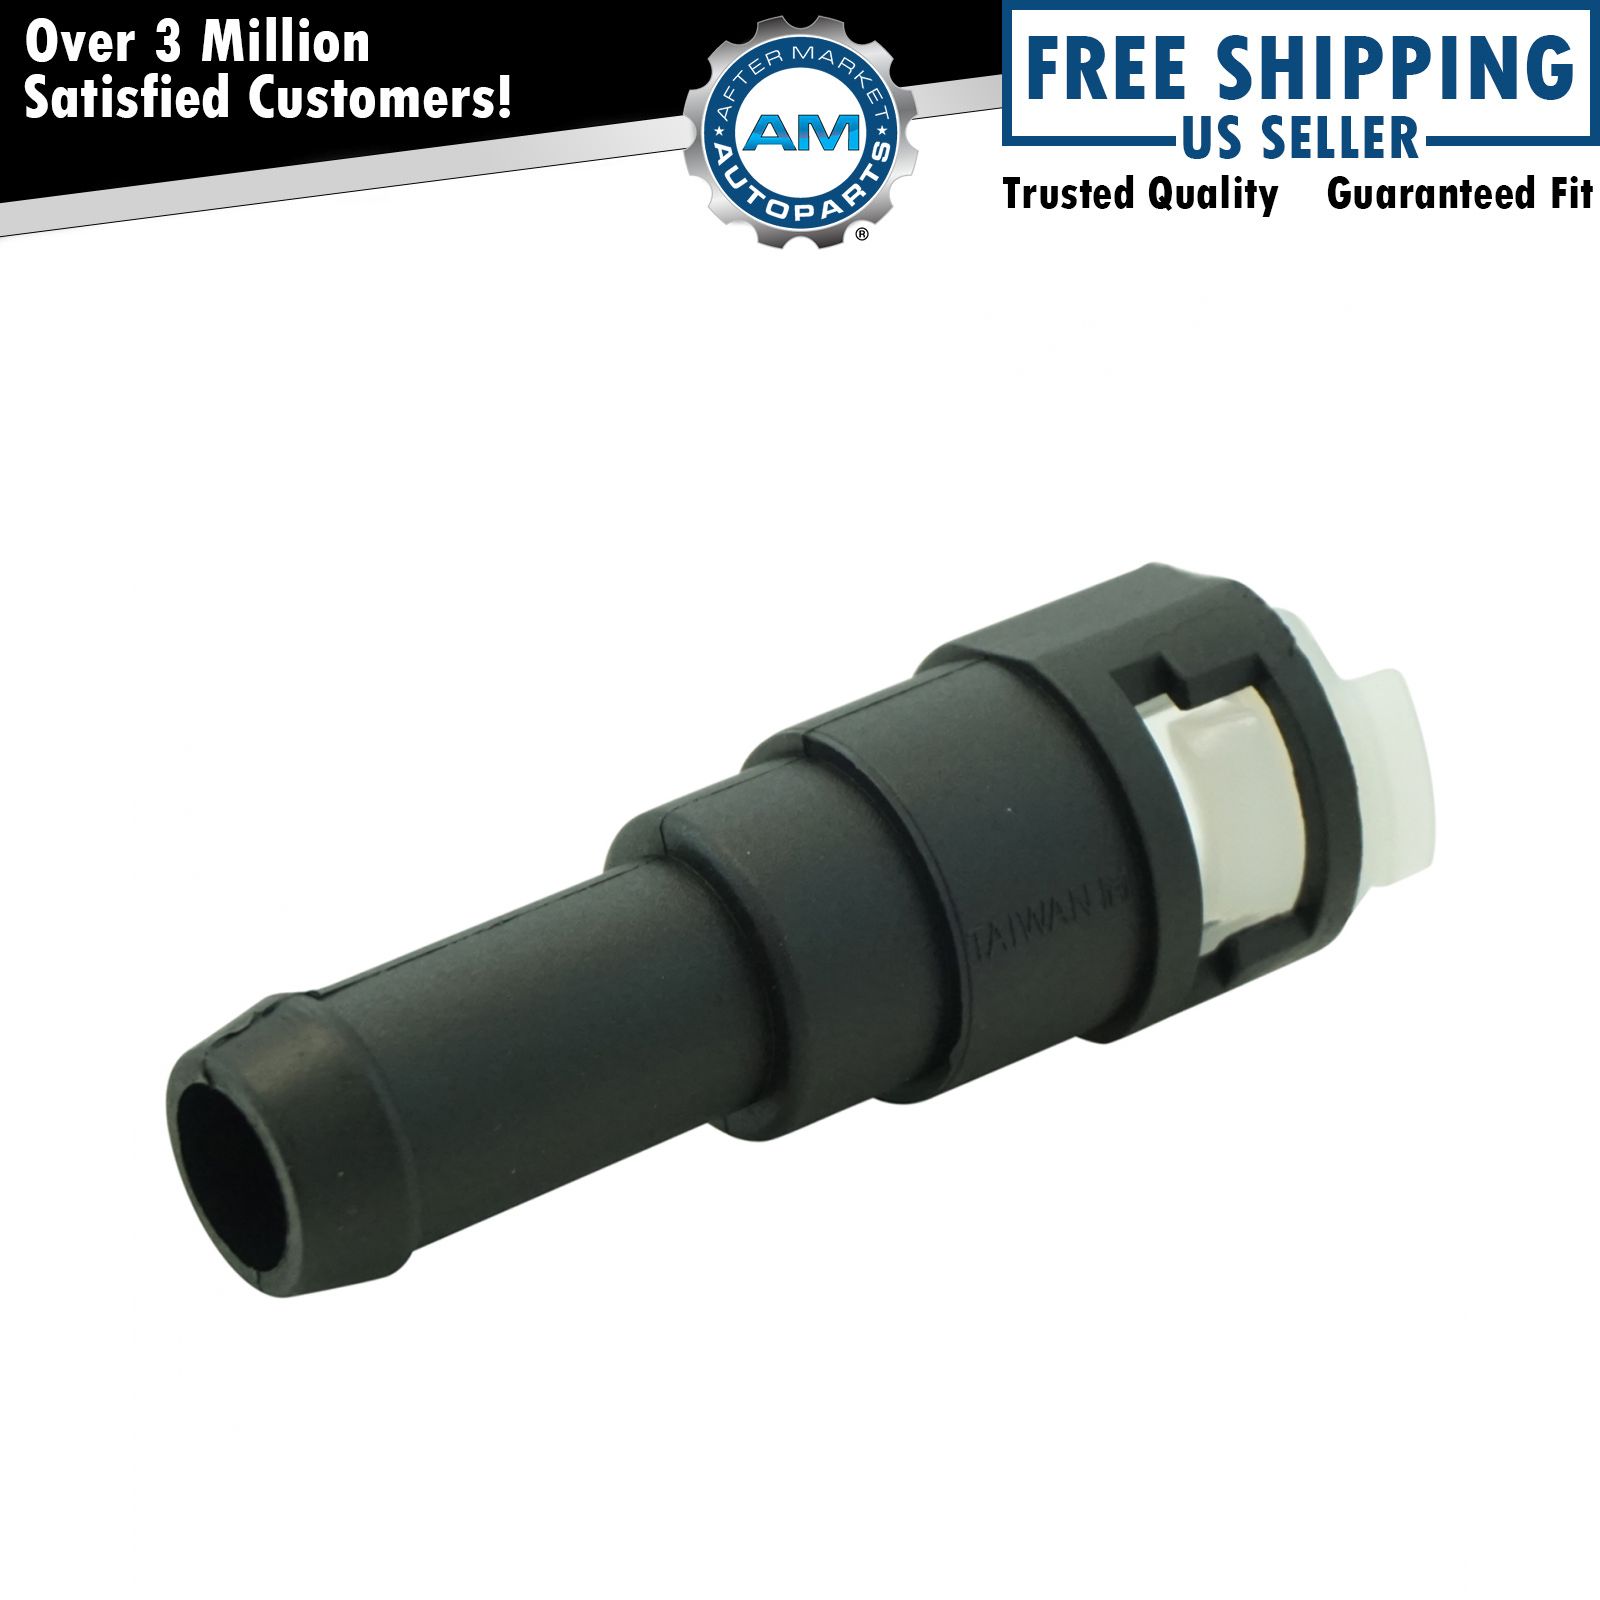 Dorman 800-403 Heater Hose Connector for Buick Chevy GMC Ford Saab Pontiac Olds